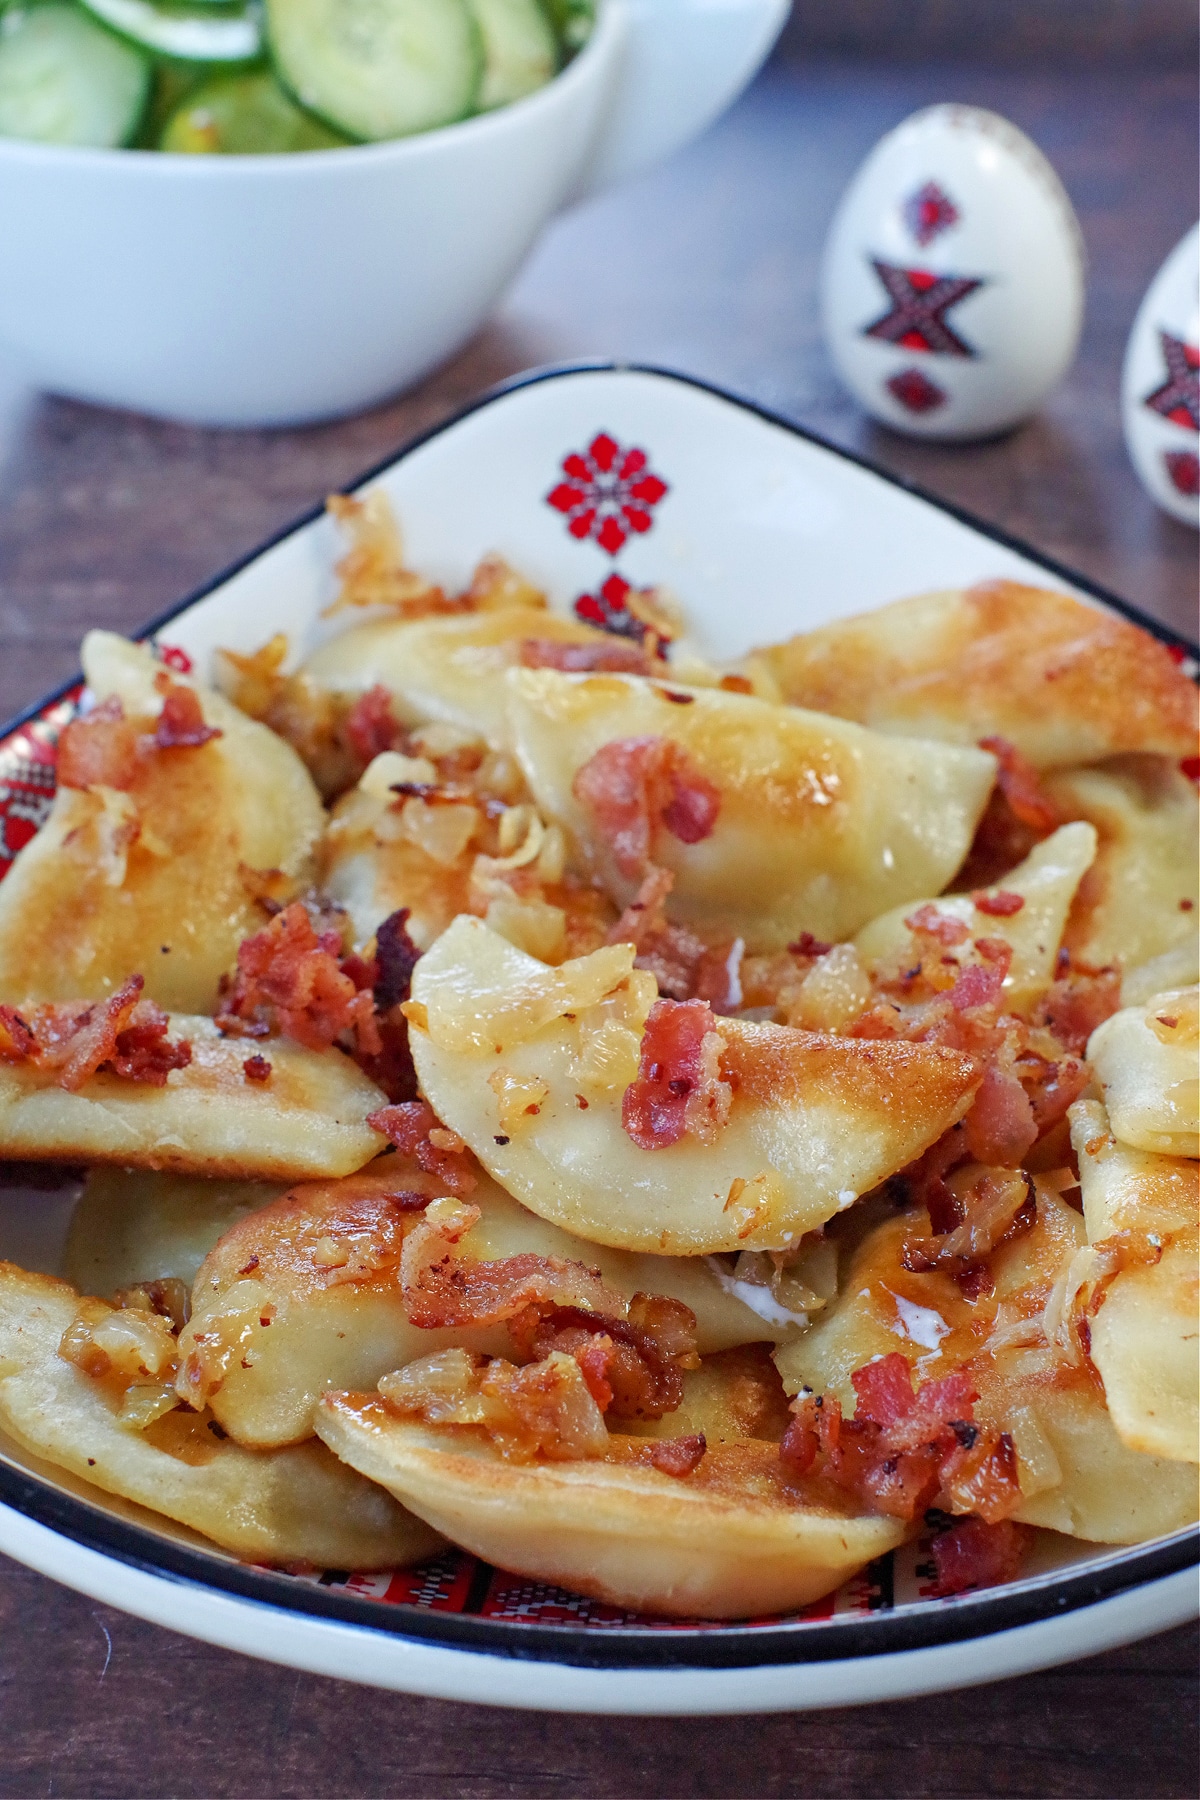 Ukrainian perogies covered in bacon and onion in a ukrainian print dish